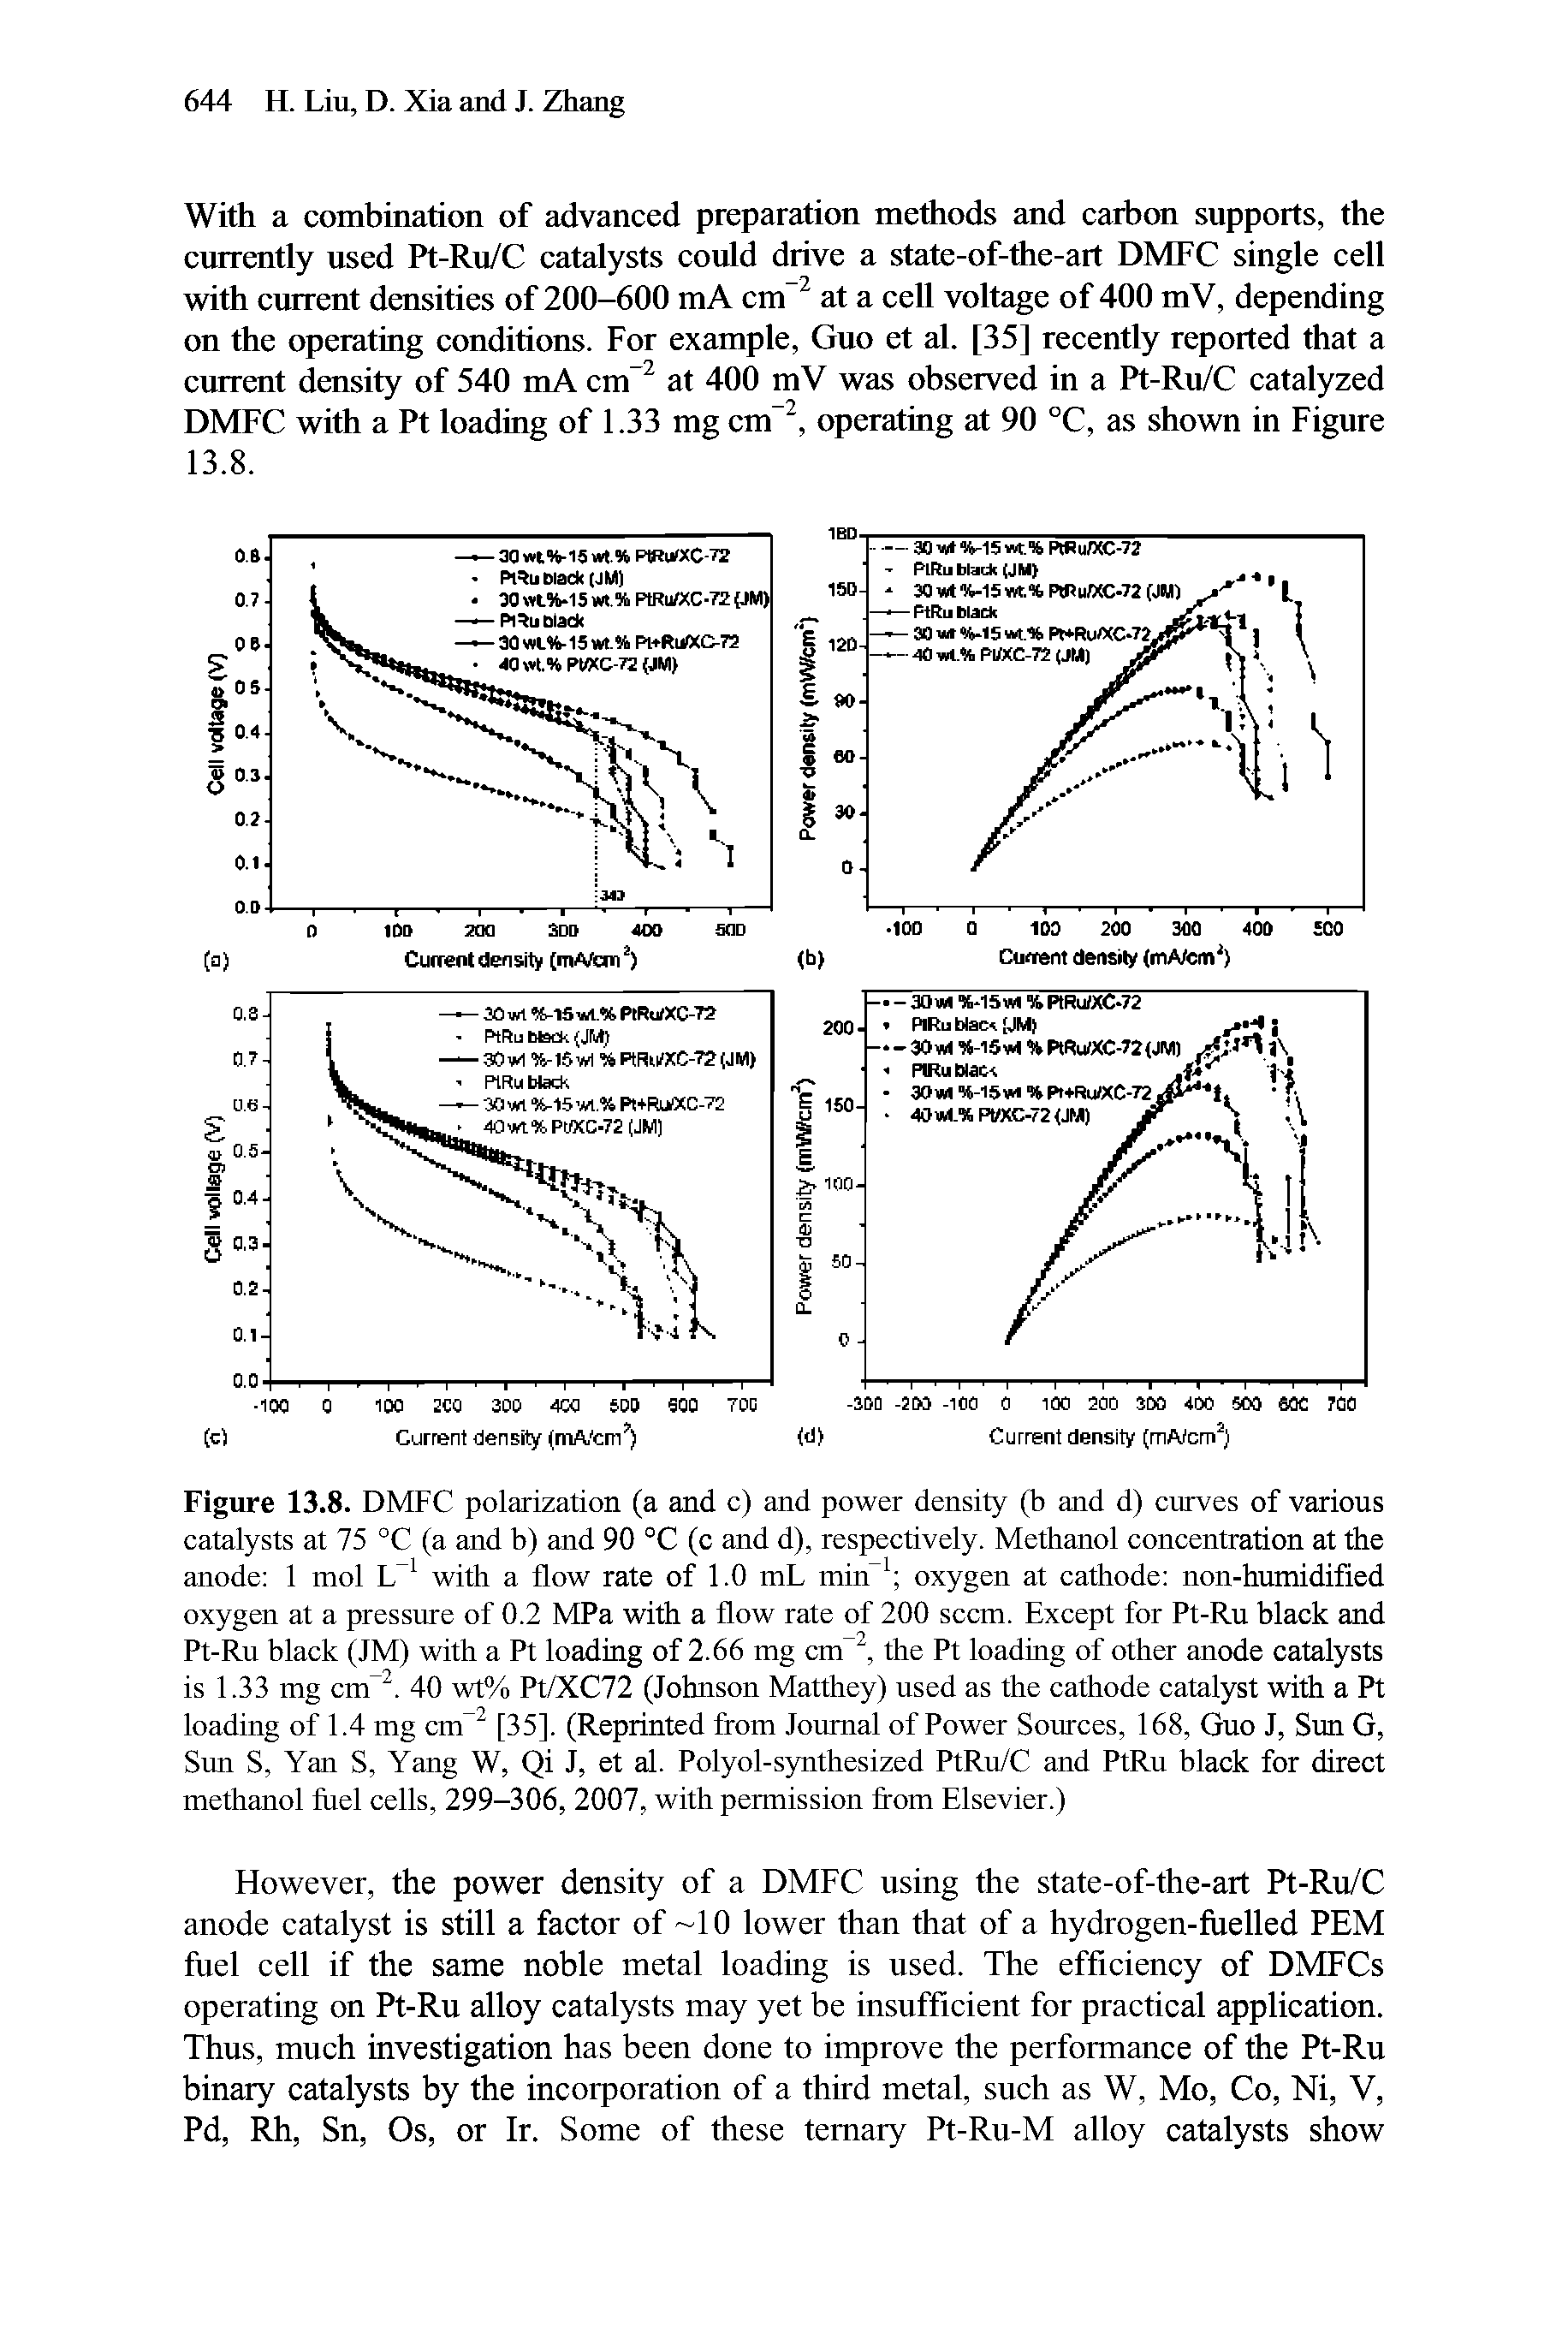 Figure 13.8. DMFC polarization (a and c) and power density (b and d) curves of various catalysts at 75 °C (a and b) and 90 °C (c and d), respectively. Methanol concentration at the anode 1 mol with a flow rate of 1.0 mL min oxygen at cathode non-htunidified oxygen at a pressure of 0.2 MPa with a flow rate of 200 seem. Except for Pt-Ru black and Pt-Ru black (JM) with a Pt loading of 2.66 mg cm, the Pt loading of other anode catalysts is 1.33 mg cm. 40 wt% Pt/XC72 (Johnson Matthey) used as the cathode catal57st with a Pt loading of 1.4 mg cm [35]. (Reprinted from Journal of Power Sources, 168, Guo J, Sun G, Sun S, Yan S, Yang W, Qi J, et al. Polyol-synthesized PtRu/C and PtRu black for direct methanol fuel cells, 299-306, 2007, with permission from Elsevier.)...